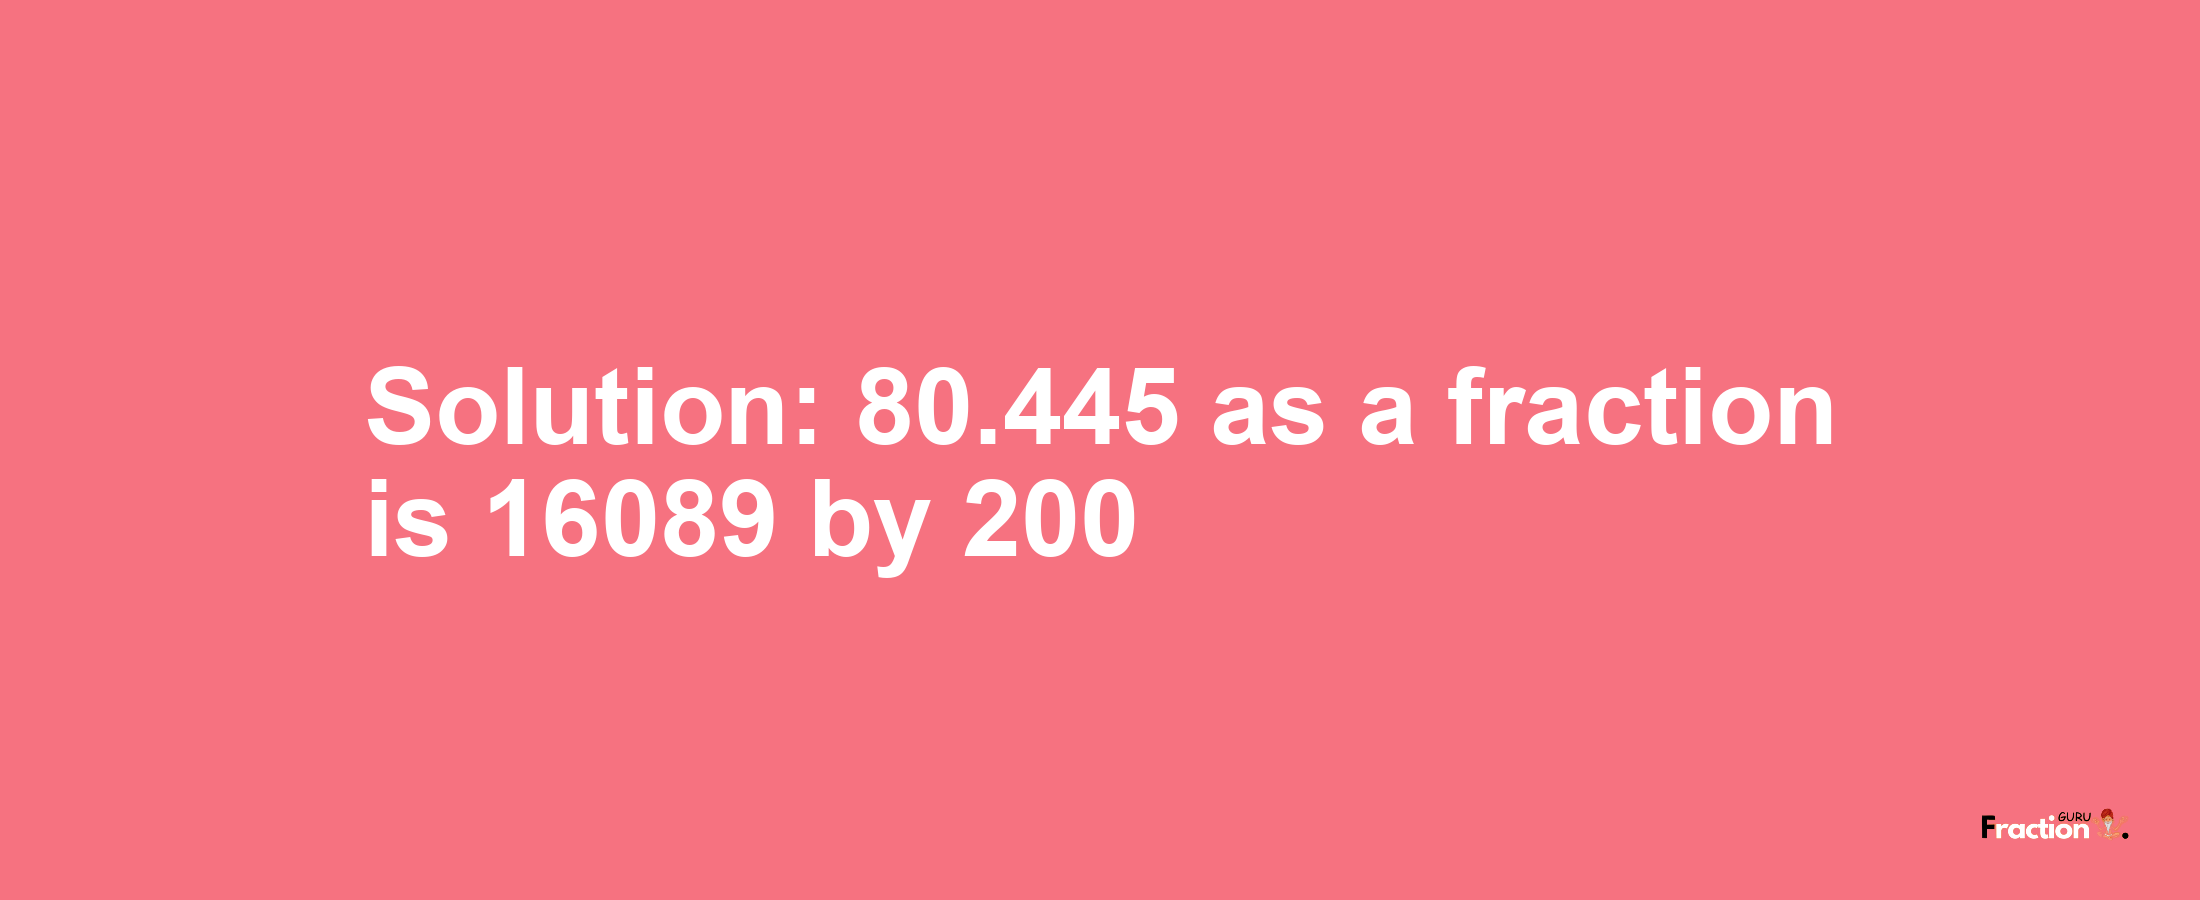 Solution:80.445 as a fraction is 16089/200